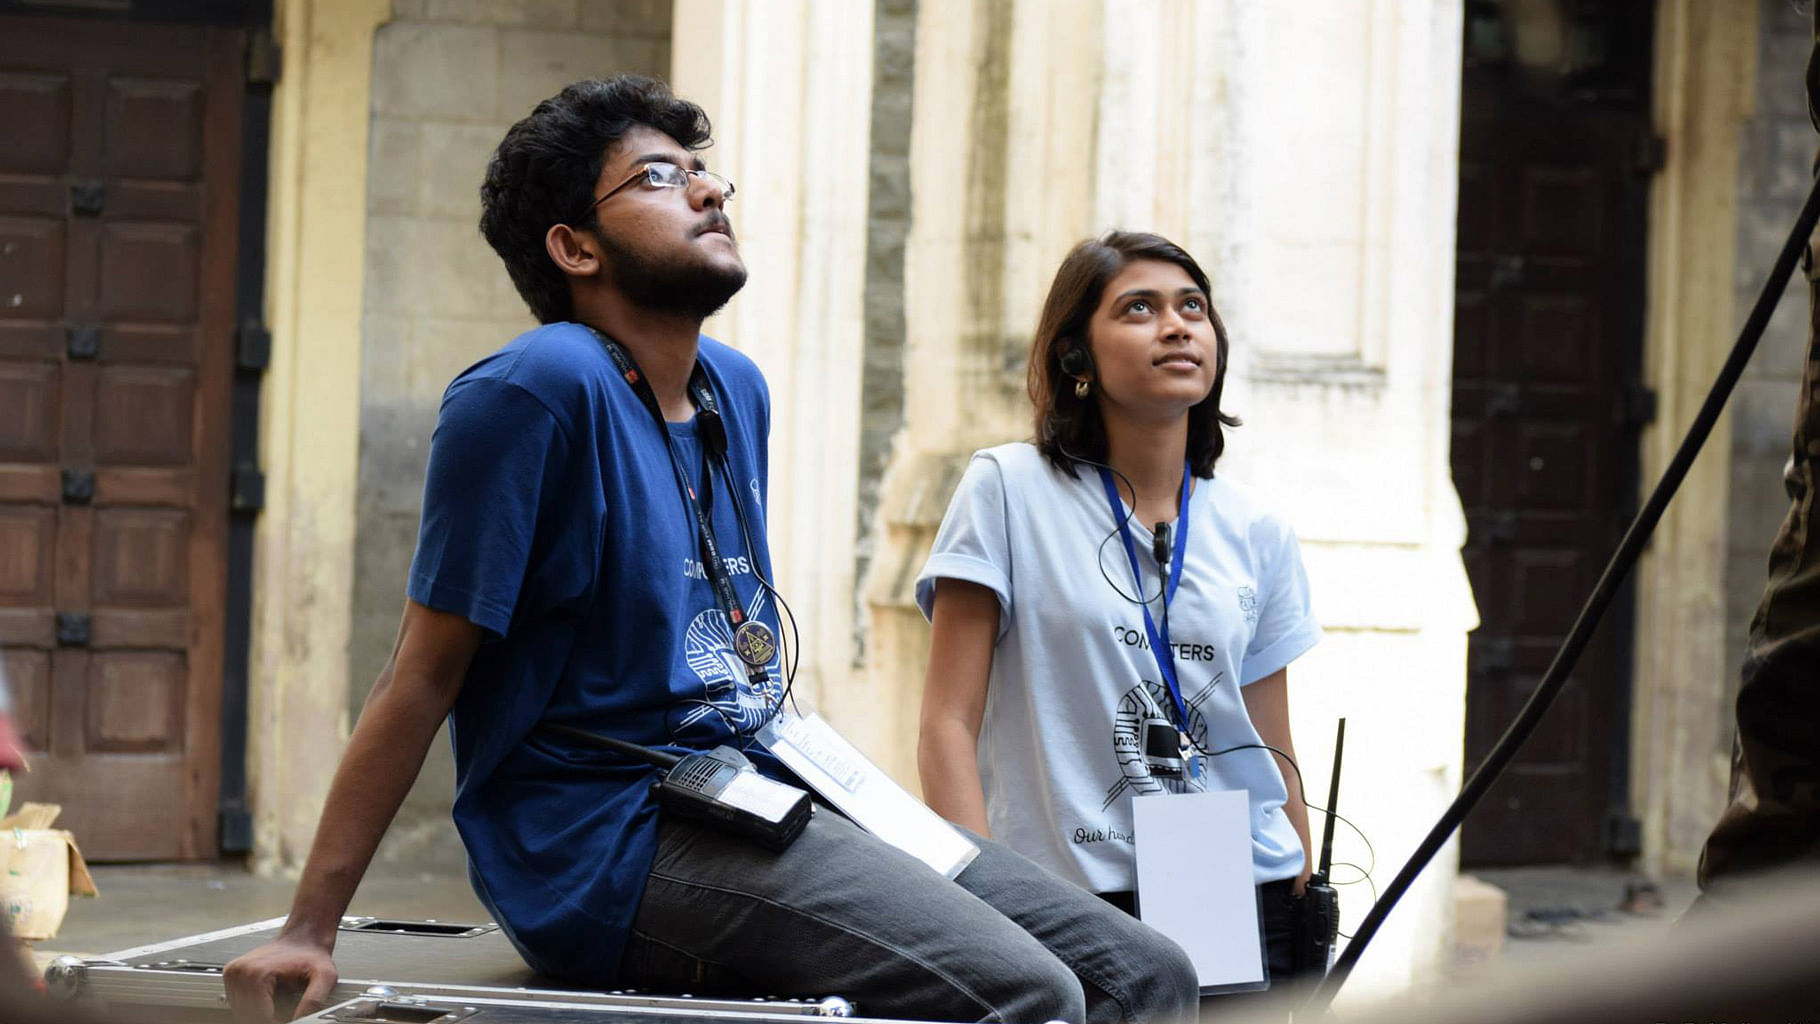 St Xavier’s students during the annual college festival, Malhar, 2015. (Photo: <a href="https://www.facebook.com/Malharfest/photos">MalharFestPhotos/Facebook</a>)